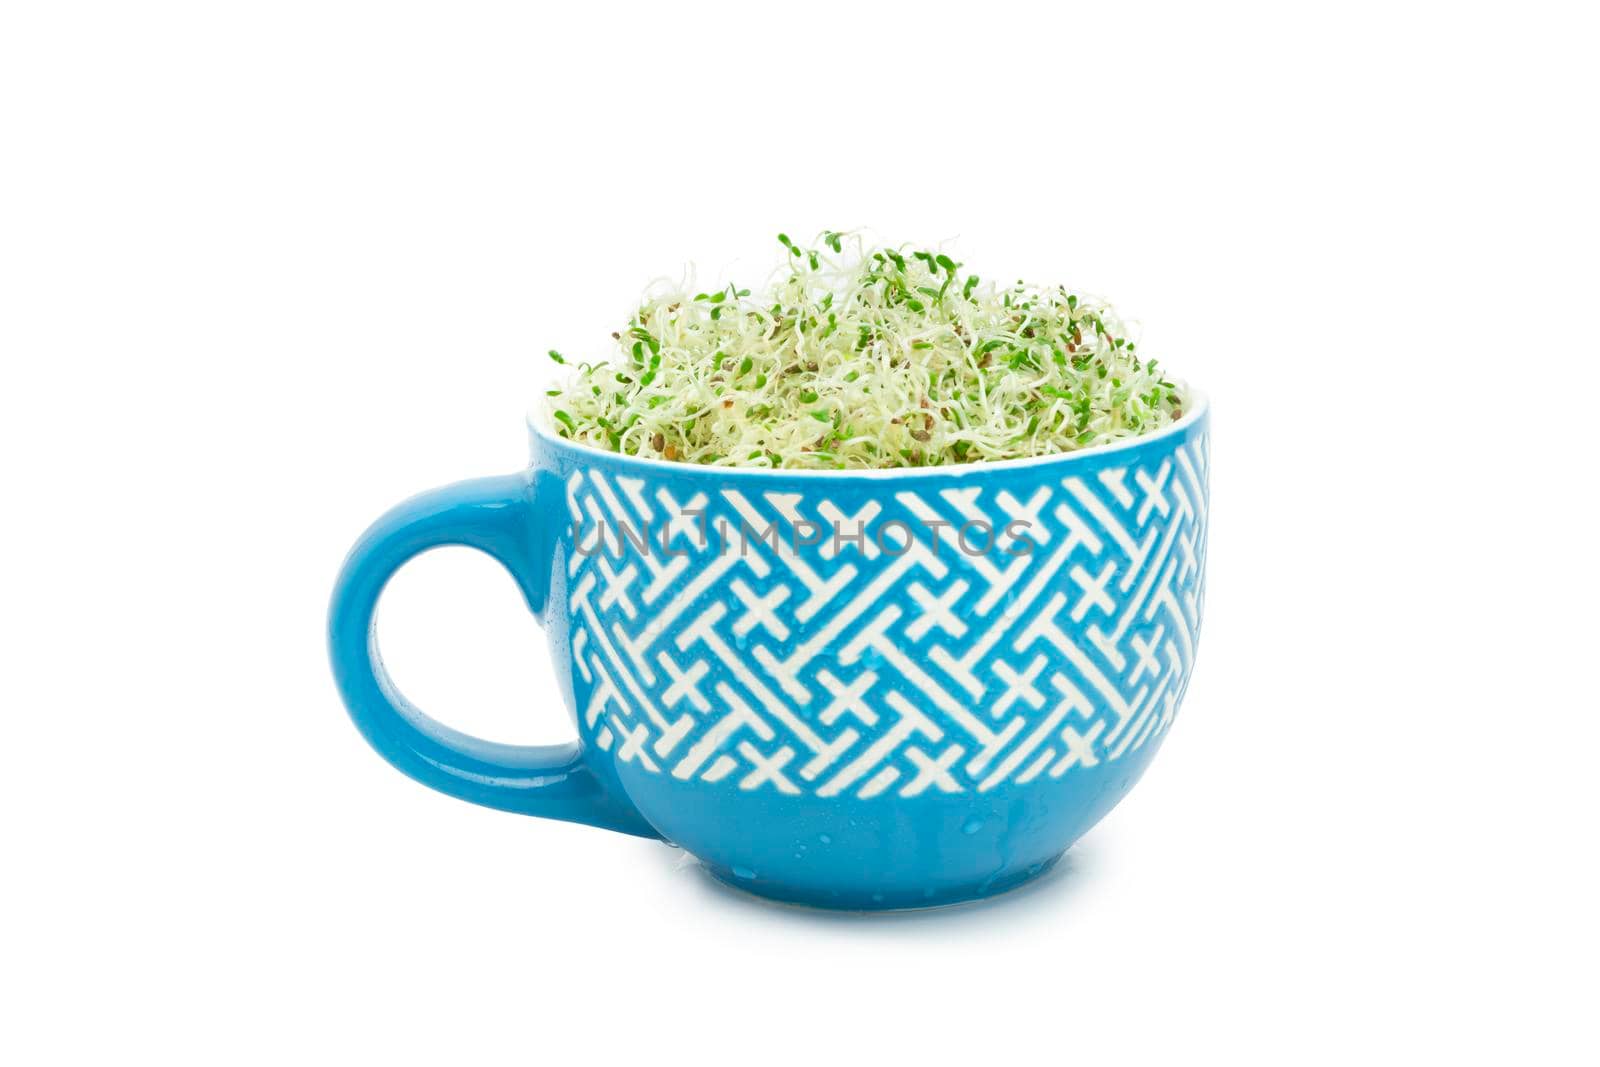 Organic young alfalfa sprouts in a cup on a white background close up with clipping path